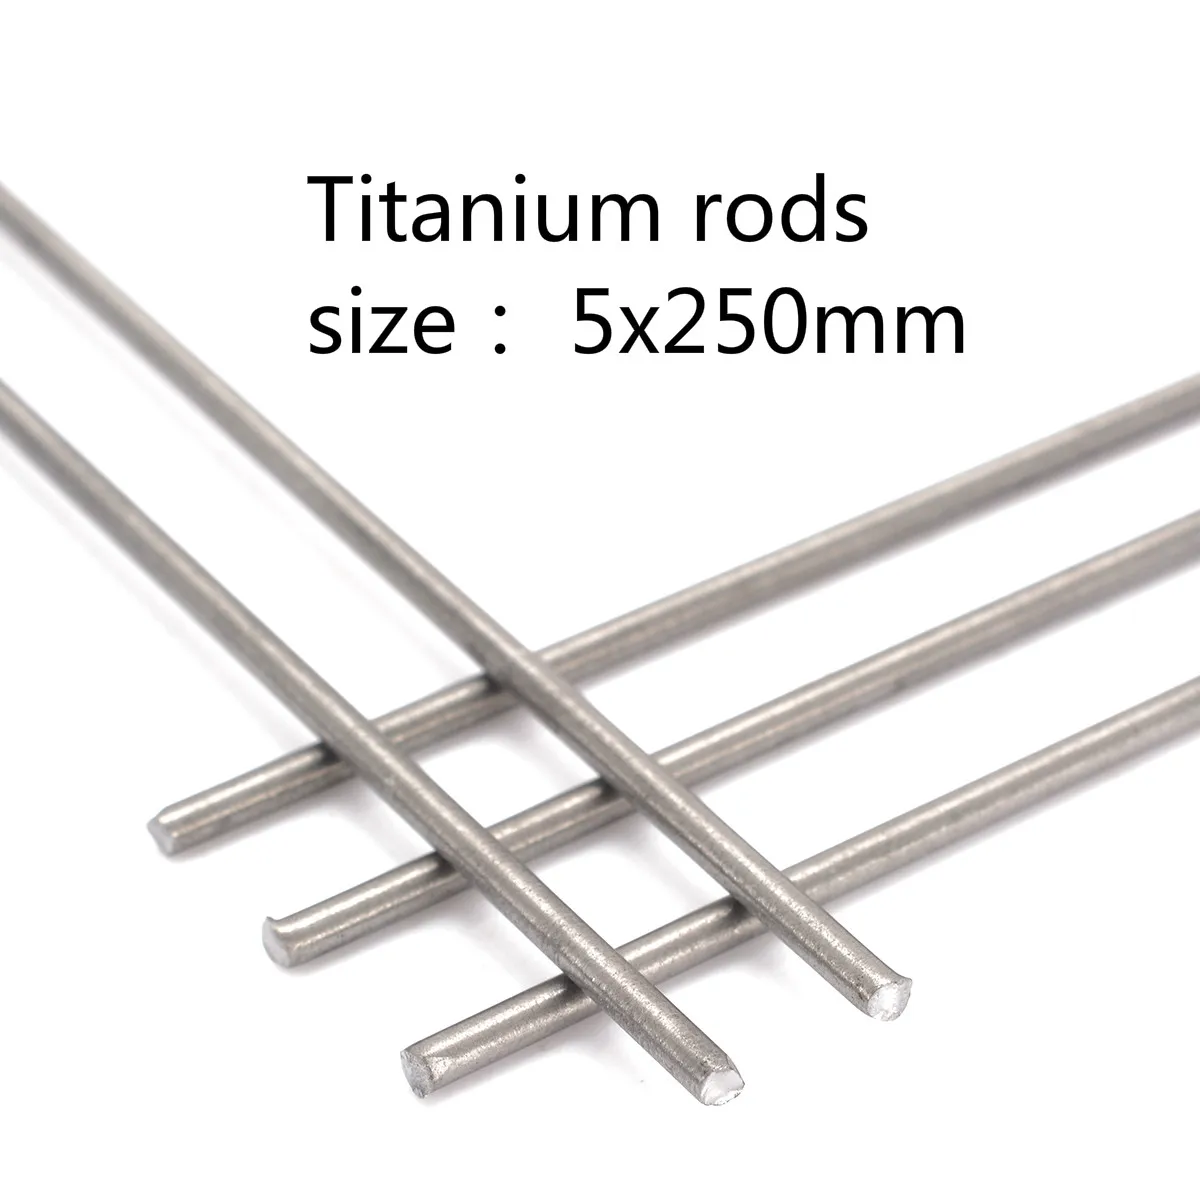 

2 pieces of titanium rods and shafts with 5mm diameter and 250mm length for industrial tools customize